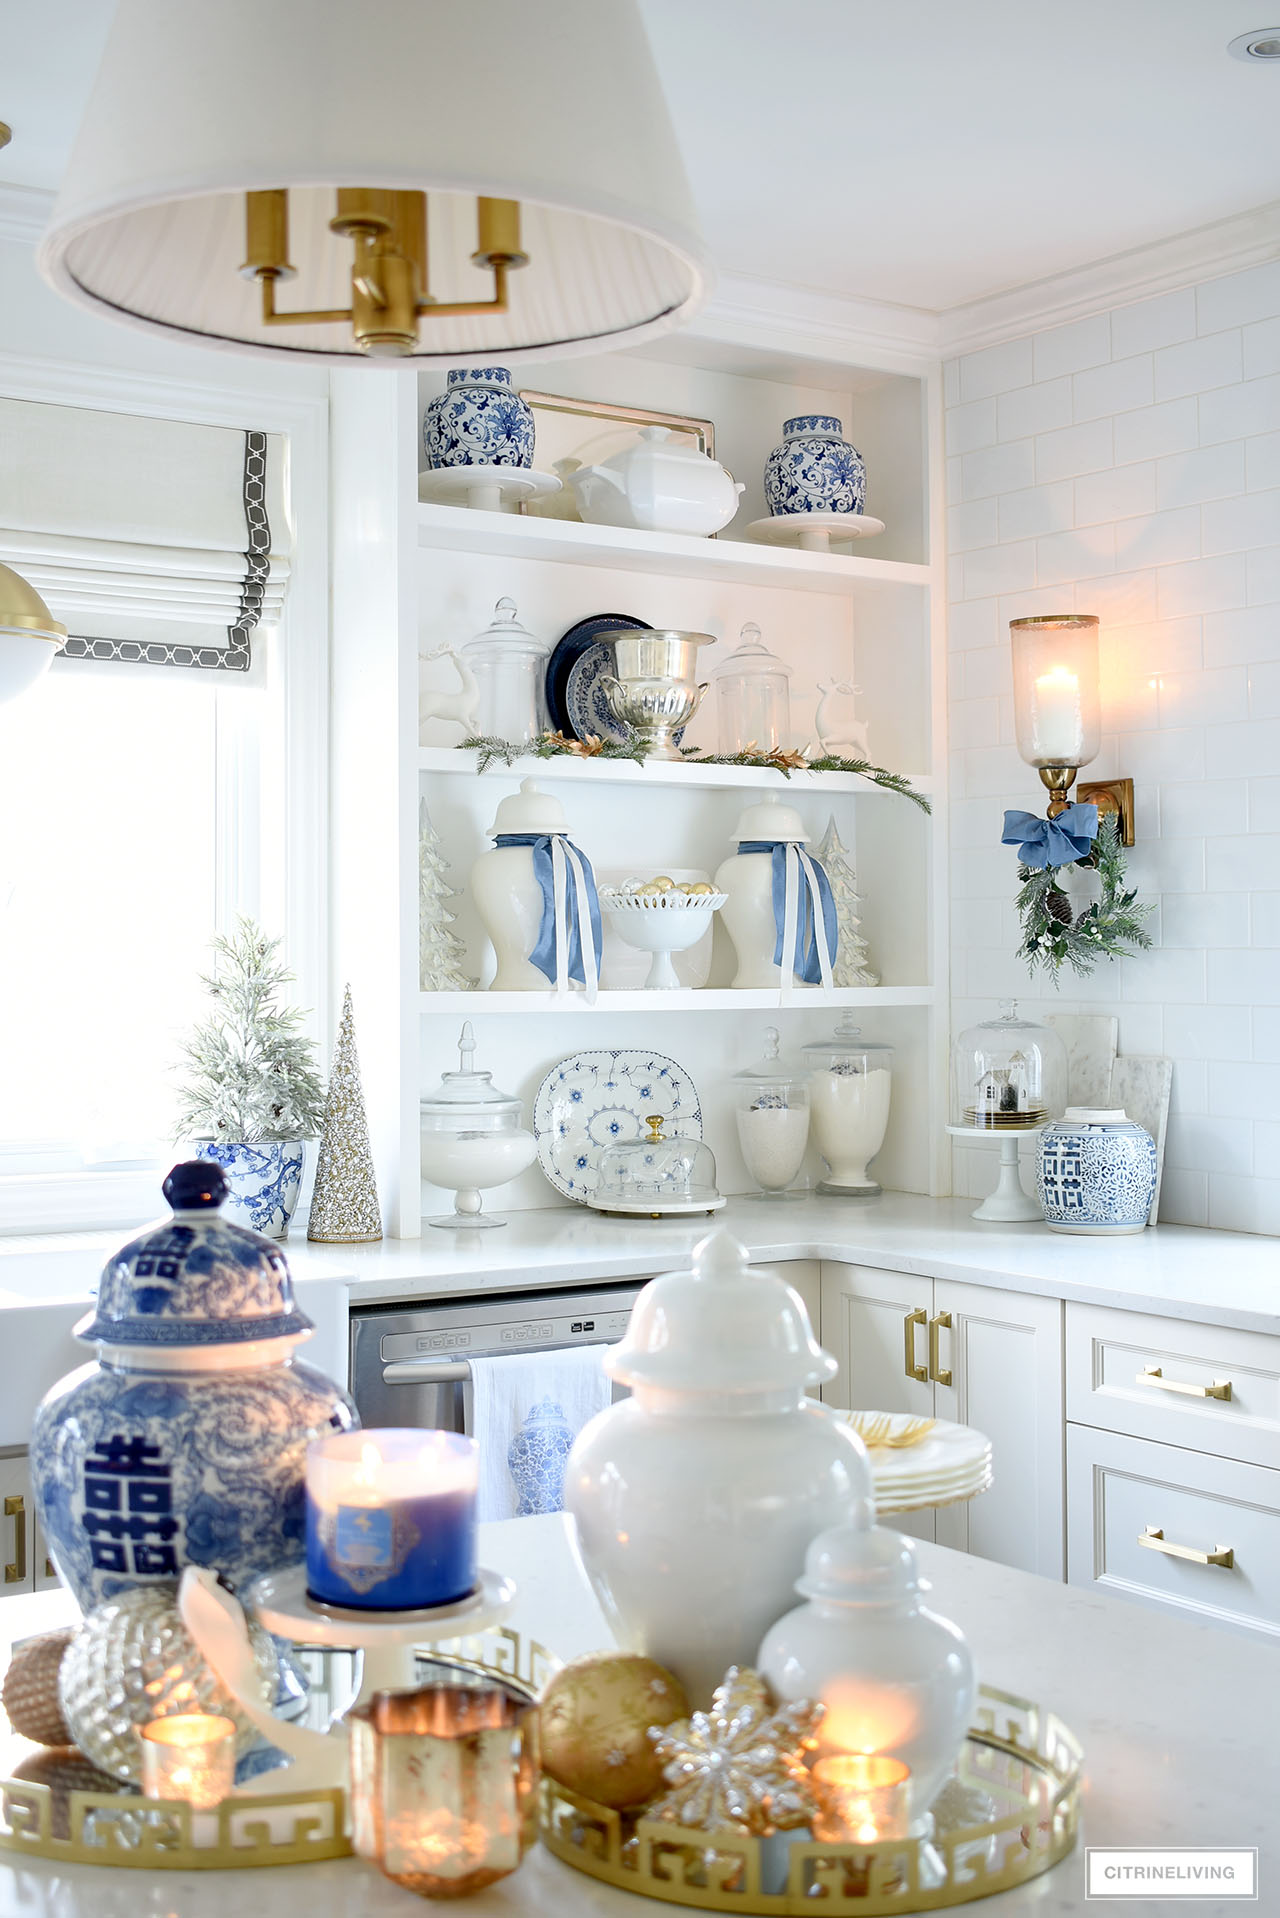 Open kitchen shelves styled for Christas with blue and white pieces, glass apothecary jars, white ceramic pieces and a few simple Christmas touches in white, gold and green.